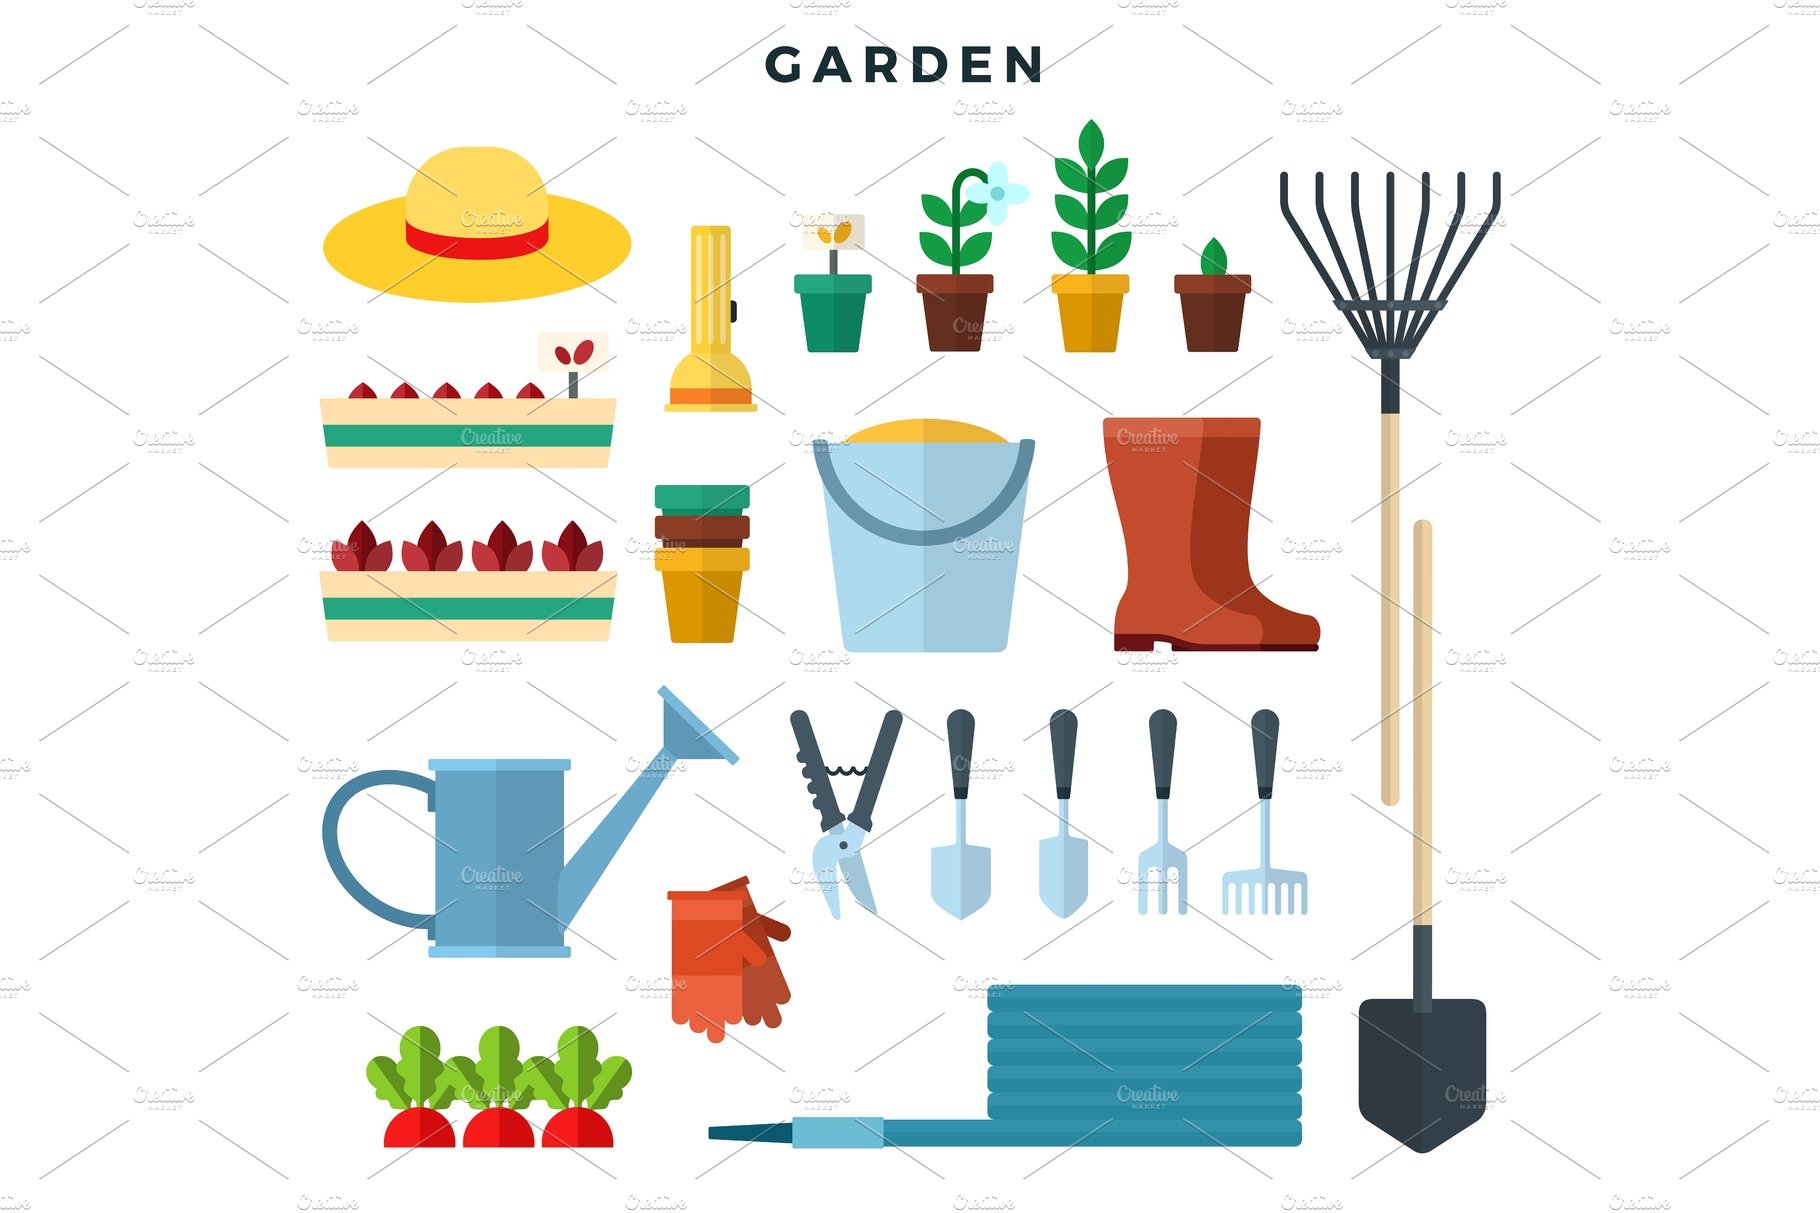 Gardening tools and equipment, flat cover image.